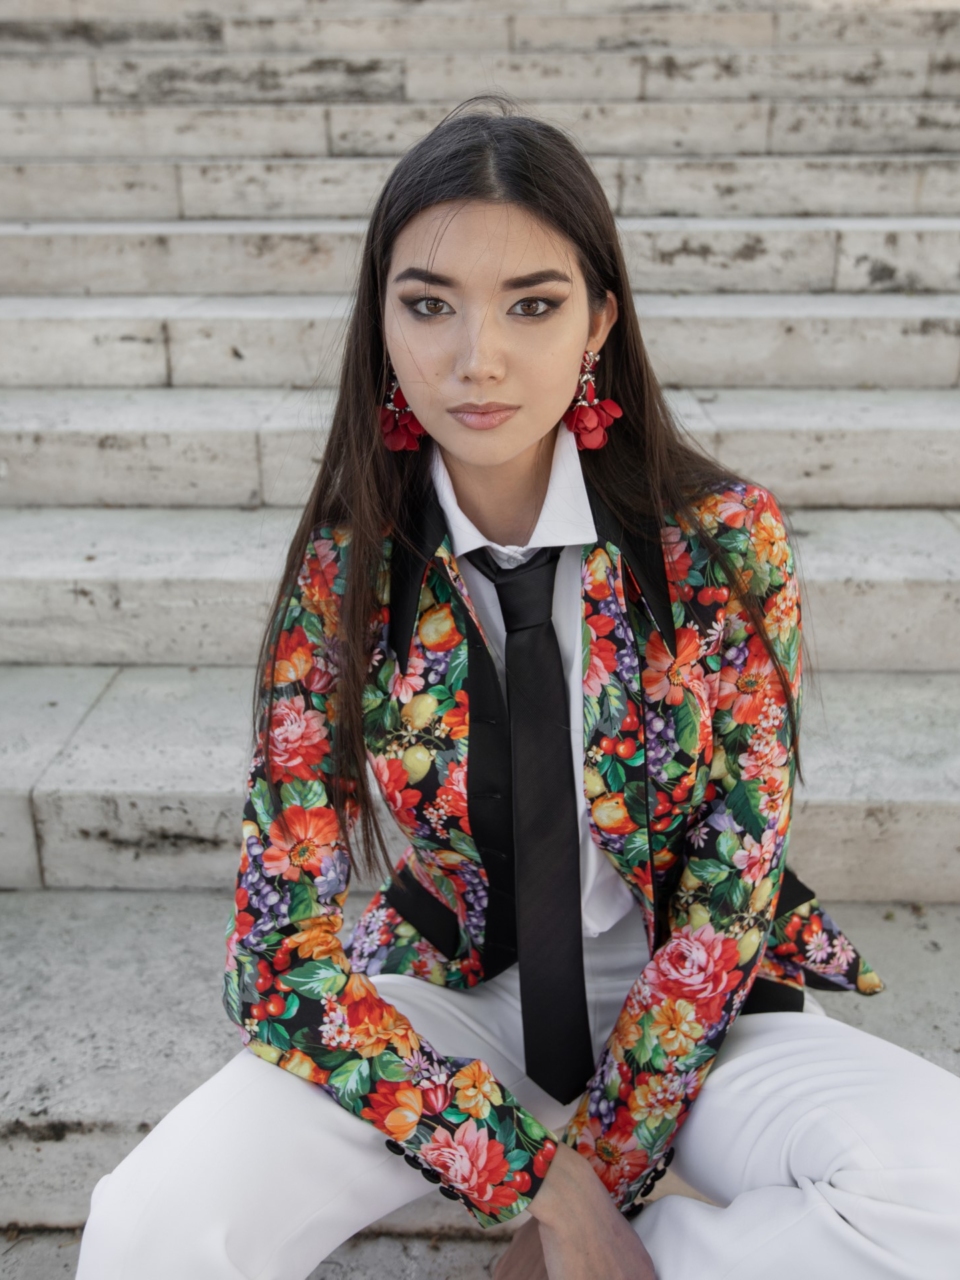 canissiiconic closed sissi jacket in floral style